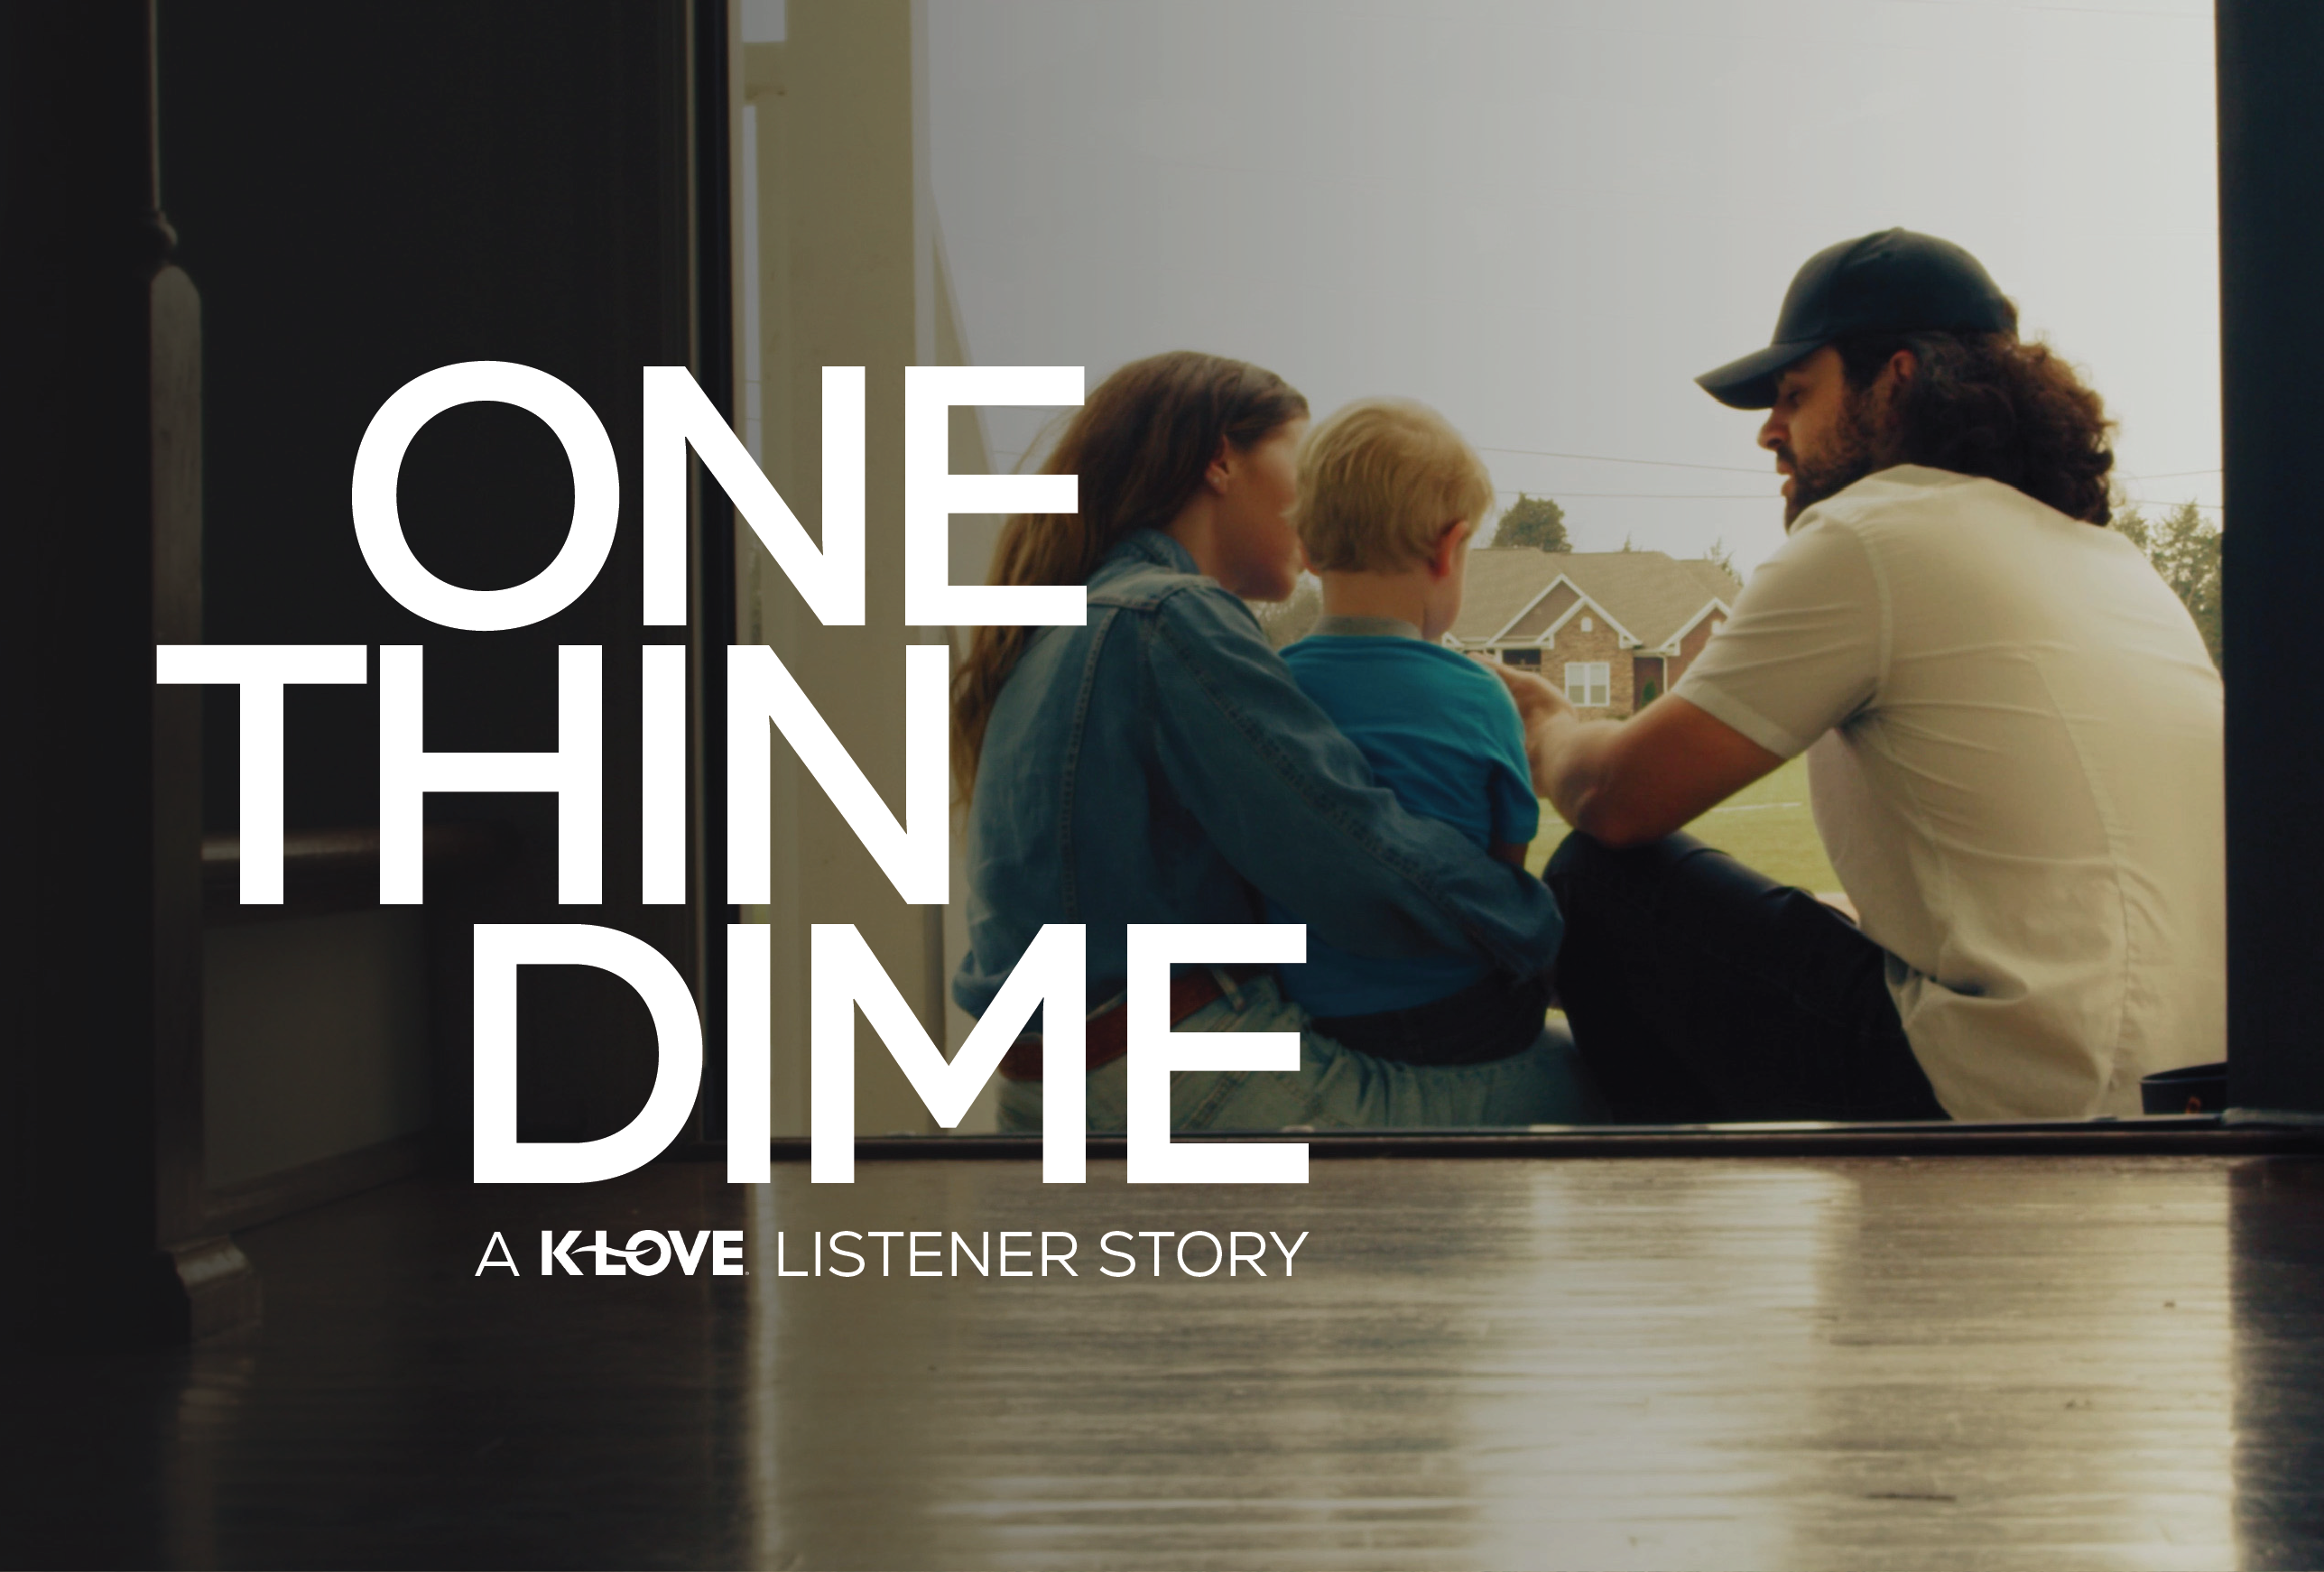 One Thin Dime: A K-LOVE Listener Story